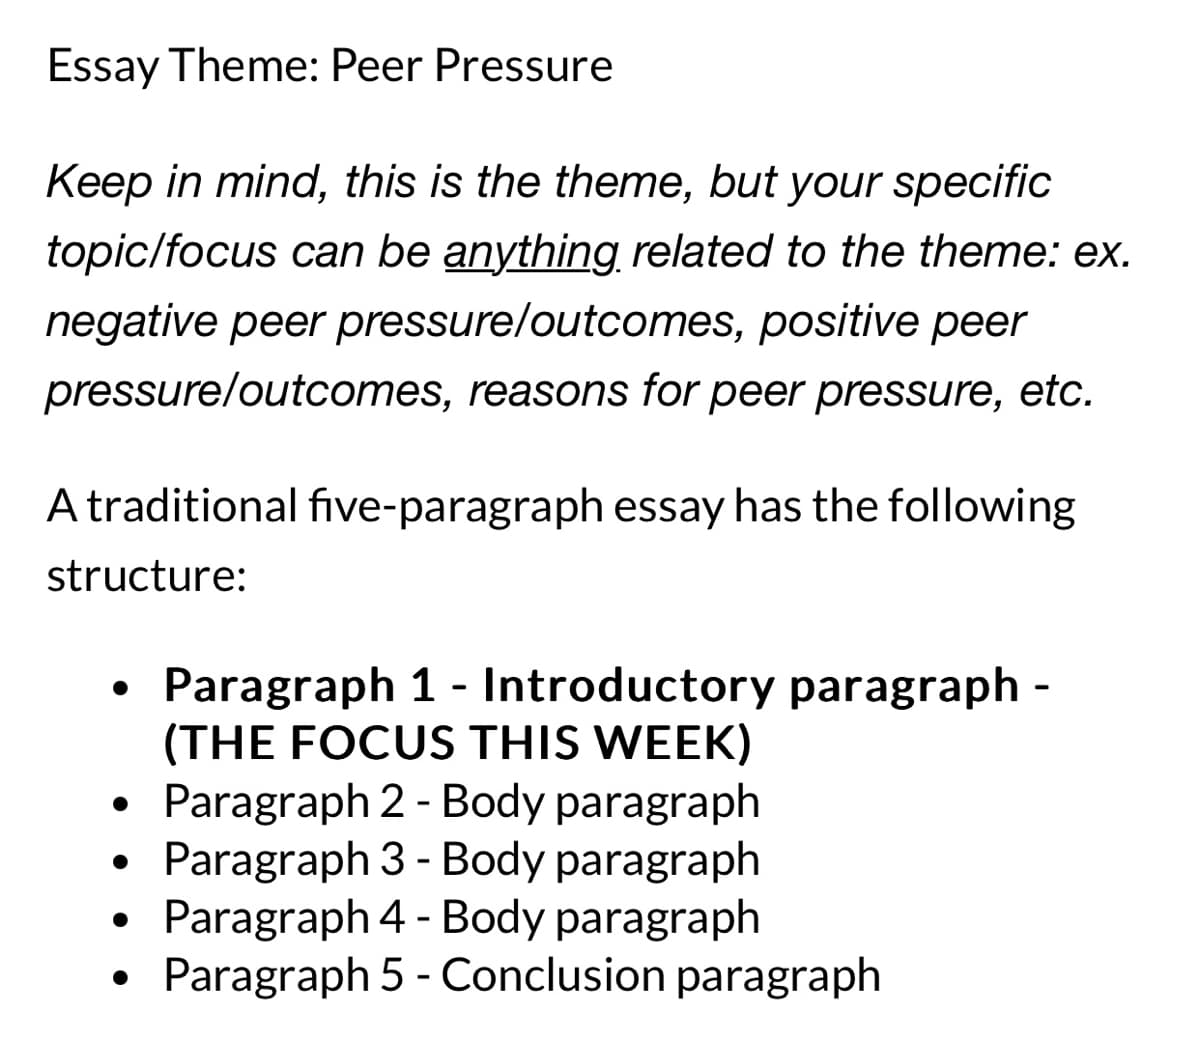 Essay Theme: Peer Pressure
Keep in mind, this is the theme, but your specific
topic/focus can be anything related to the theme: ex.
negative peer pressure/outcomes, positive peer
pressure/outcomes, reasons for peer pressure, etc.
A traditional five-paragraph essay has the following
structure:
●
●
Paragraph 1- Introductory paragraph -
(THE FOCUS THIS WEEK)
Paragraph 2 - Body paragraph
Paragraph 3 - Body paragraph
Paragraph 4 - Body paragraph
Paragraph 5 - Conclusion paragraph